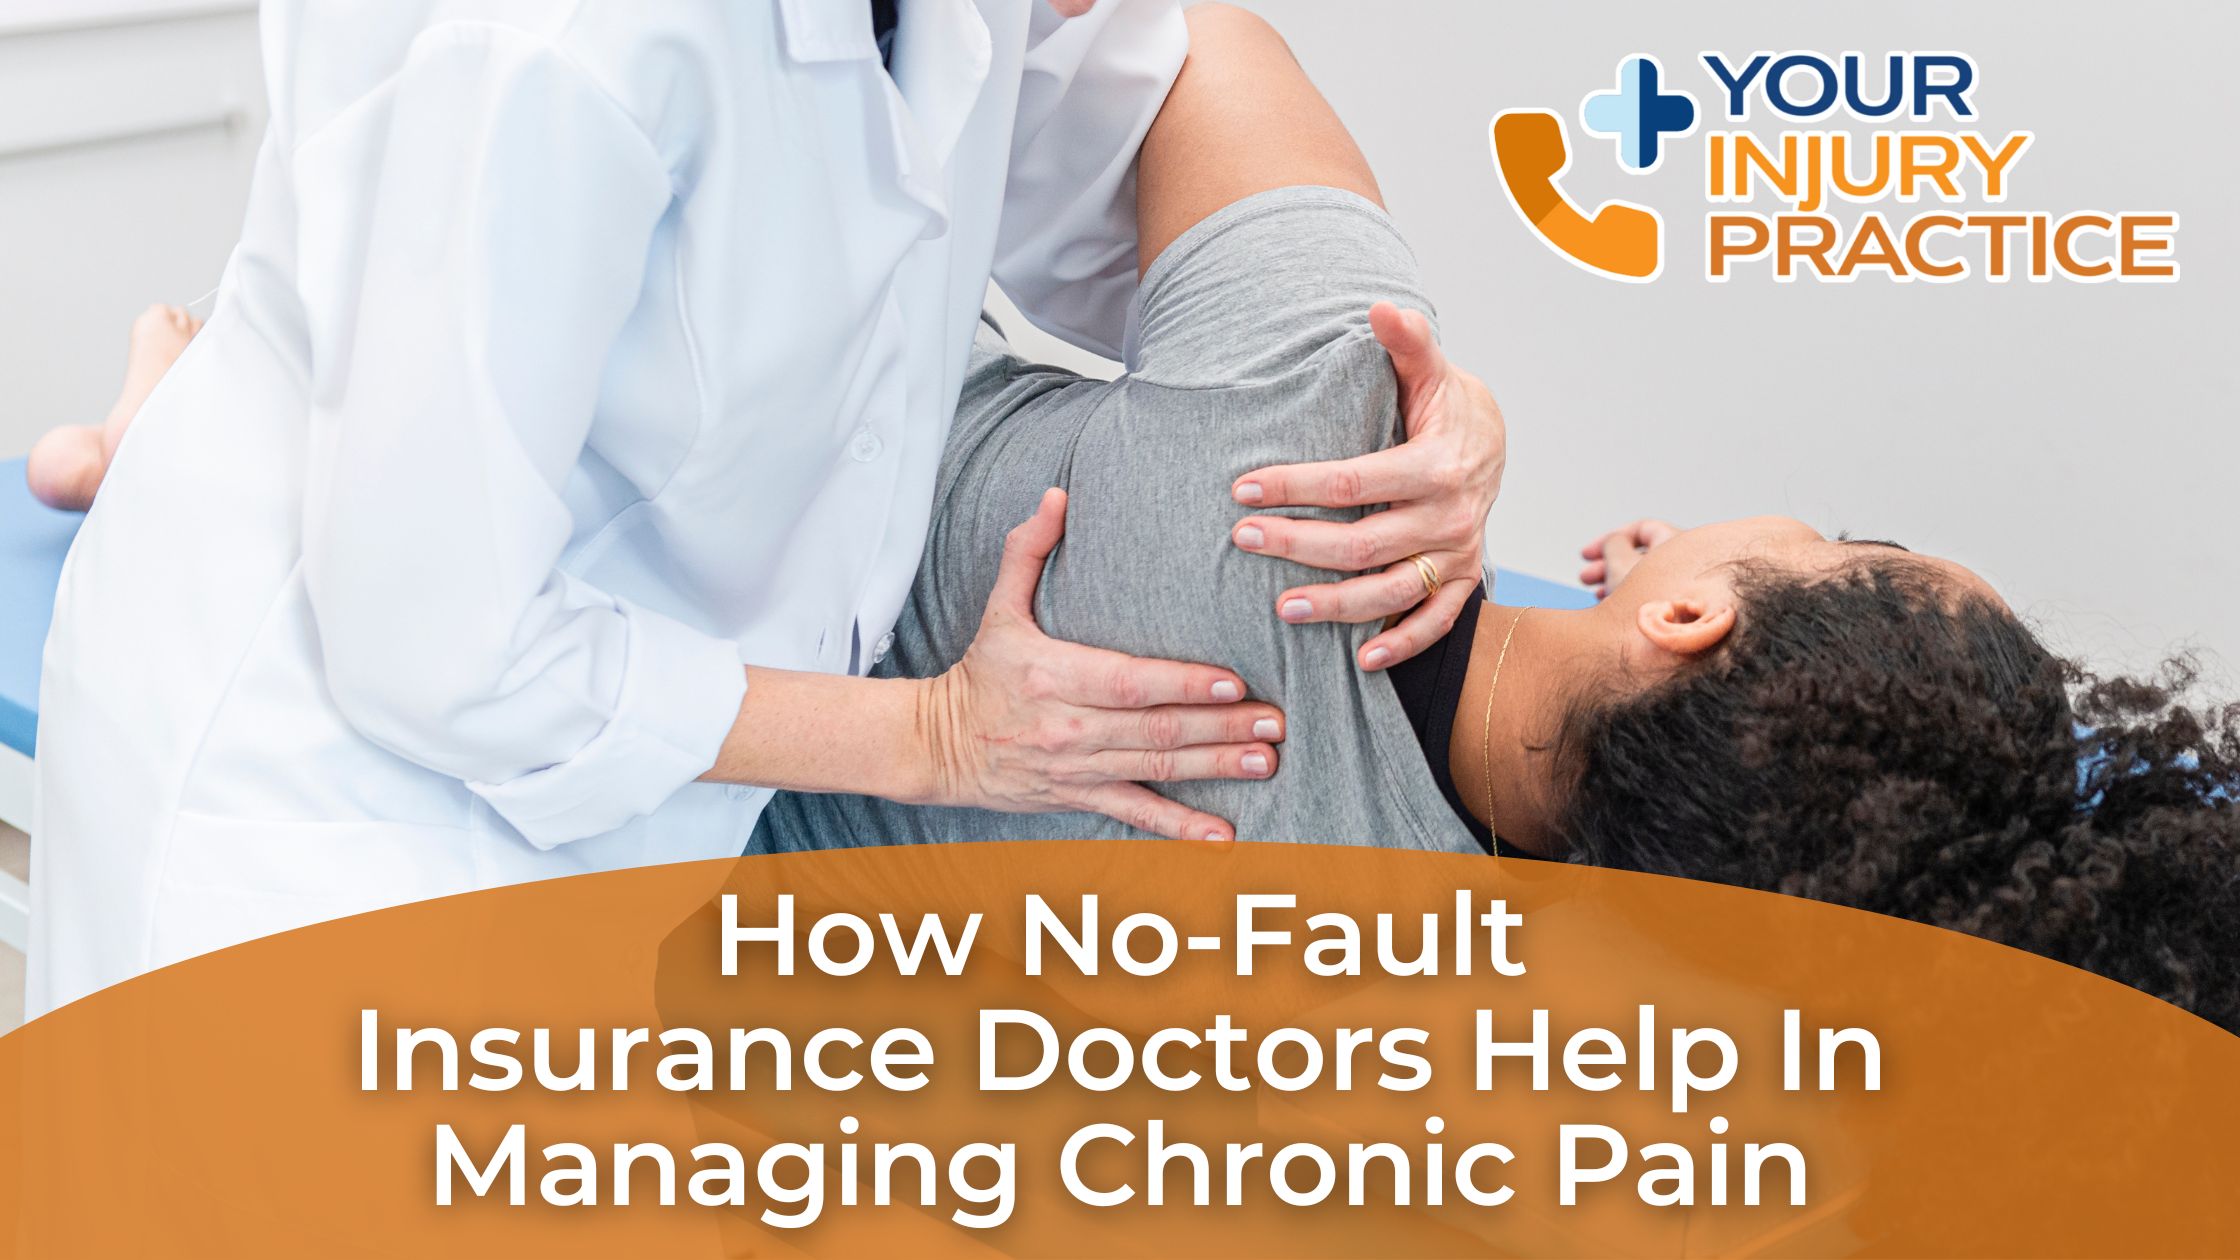 How No Fault Insurance Doctors Help in Managing Chronic Pain